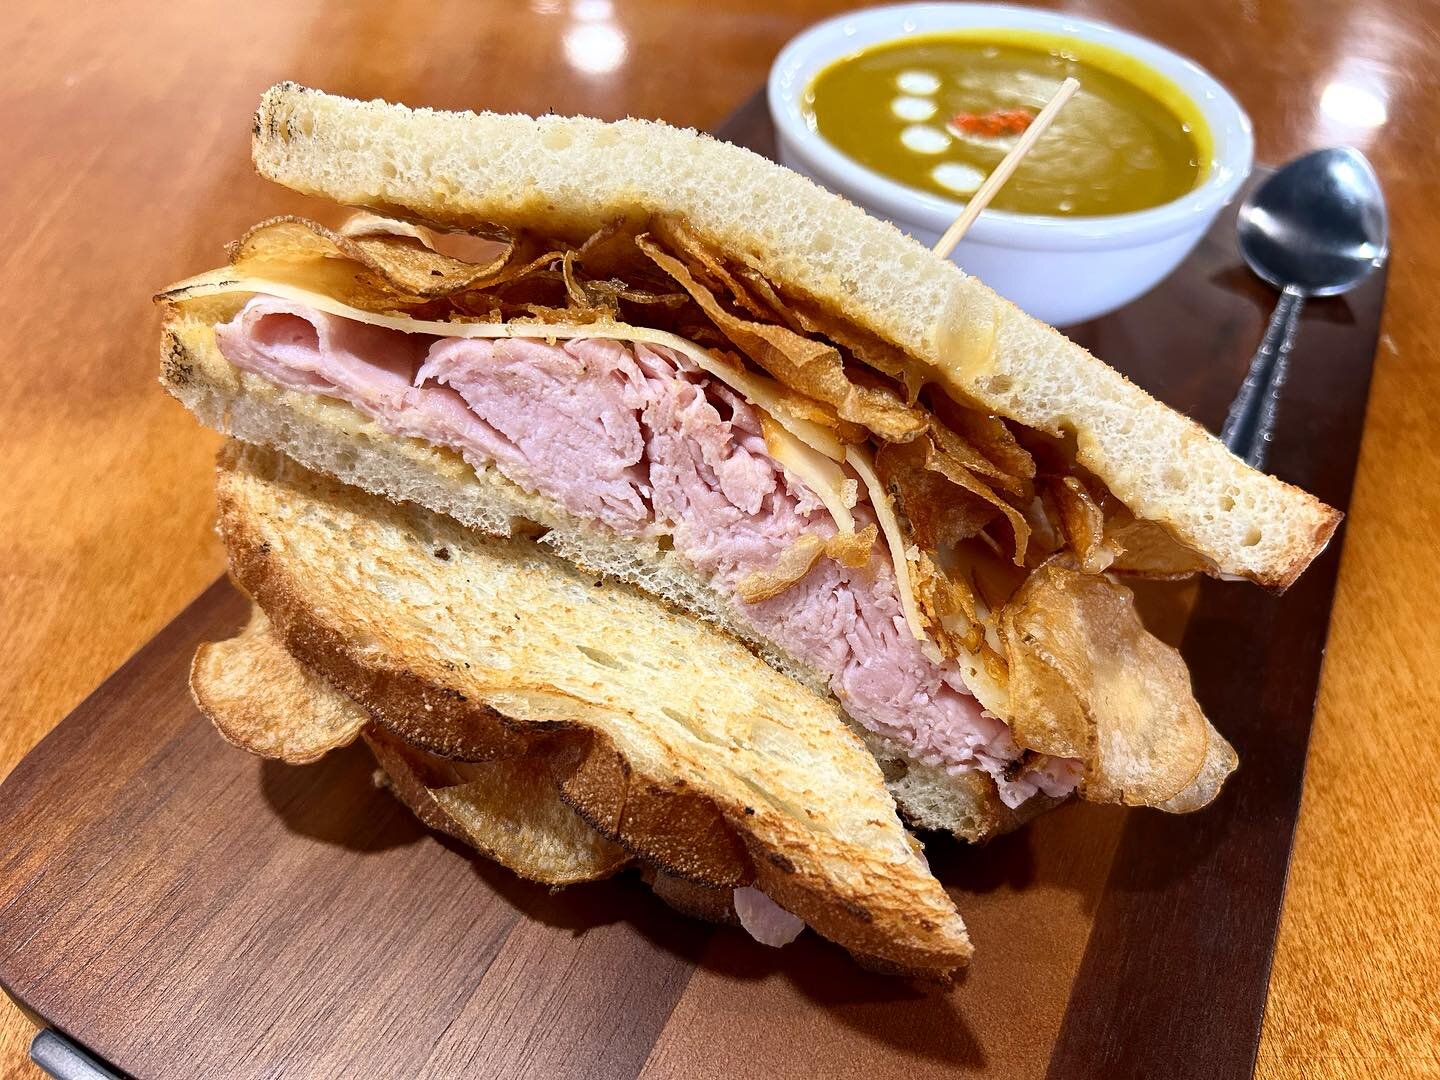 Come tuck in to todays Special Sammie 

Counter Kitchen made ham from local pork loin, garlic aioli,  honey mustard,potato chips and smoked cheddar cheese. 

All made with love, all made in house. 
11-4 friends 🥪🥔🐷